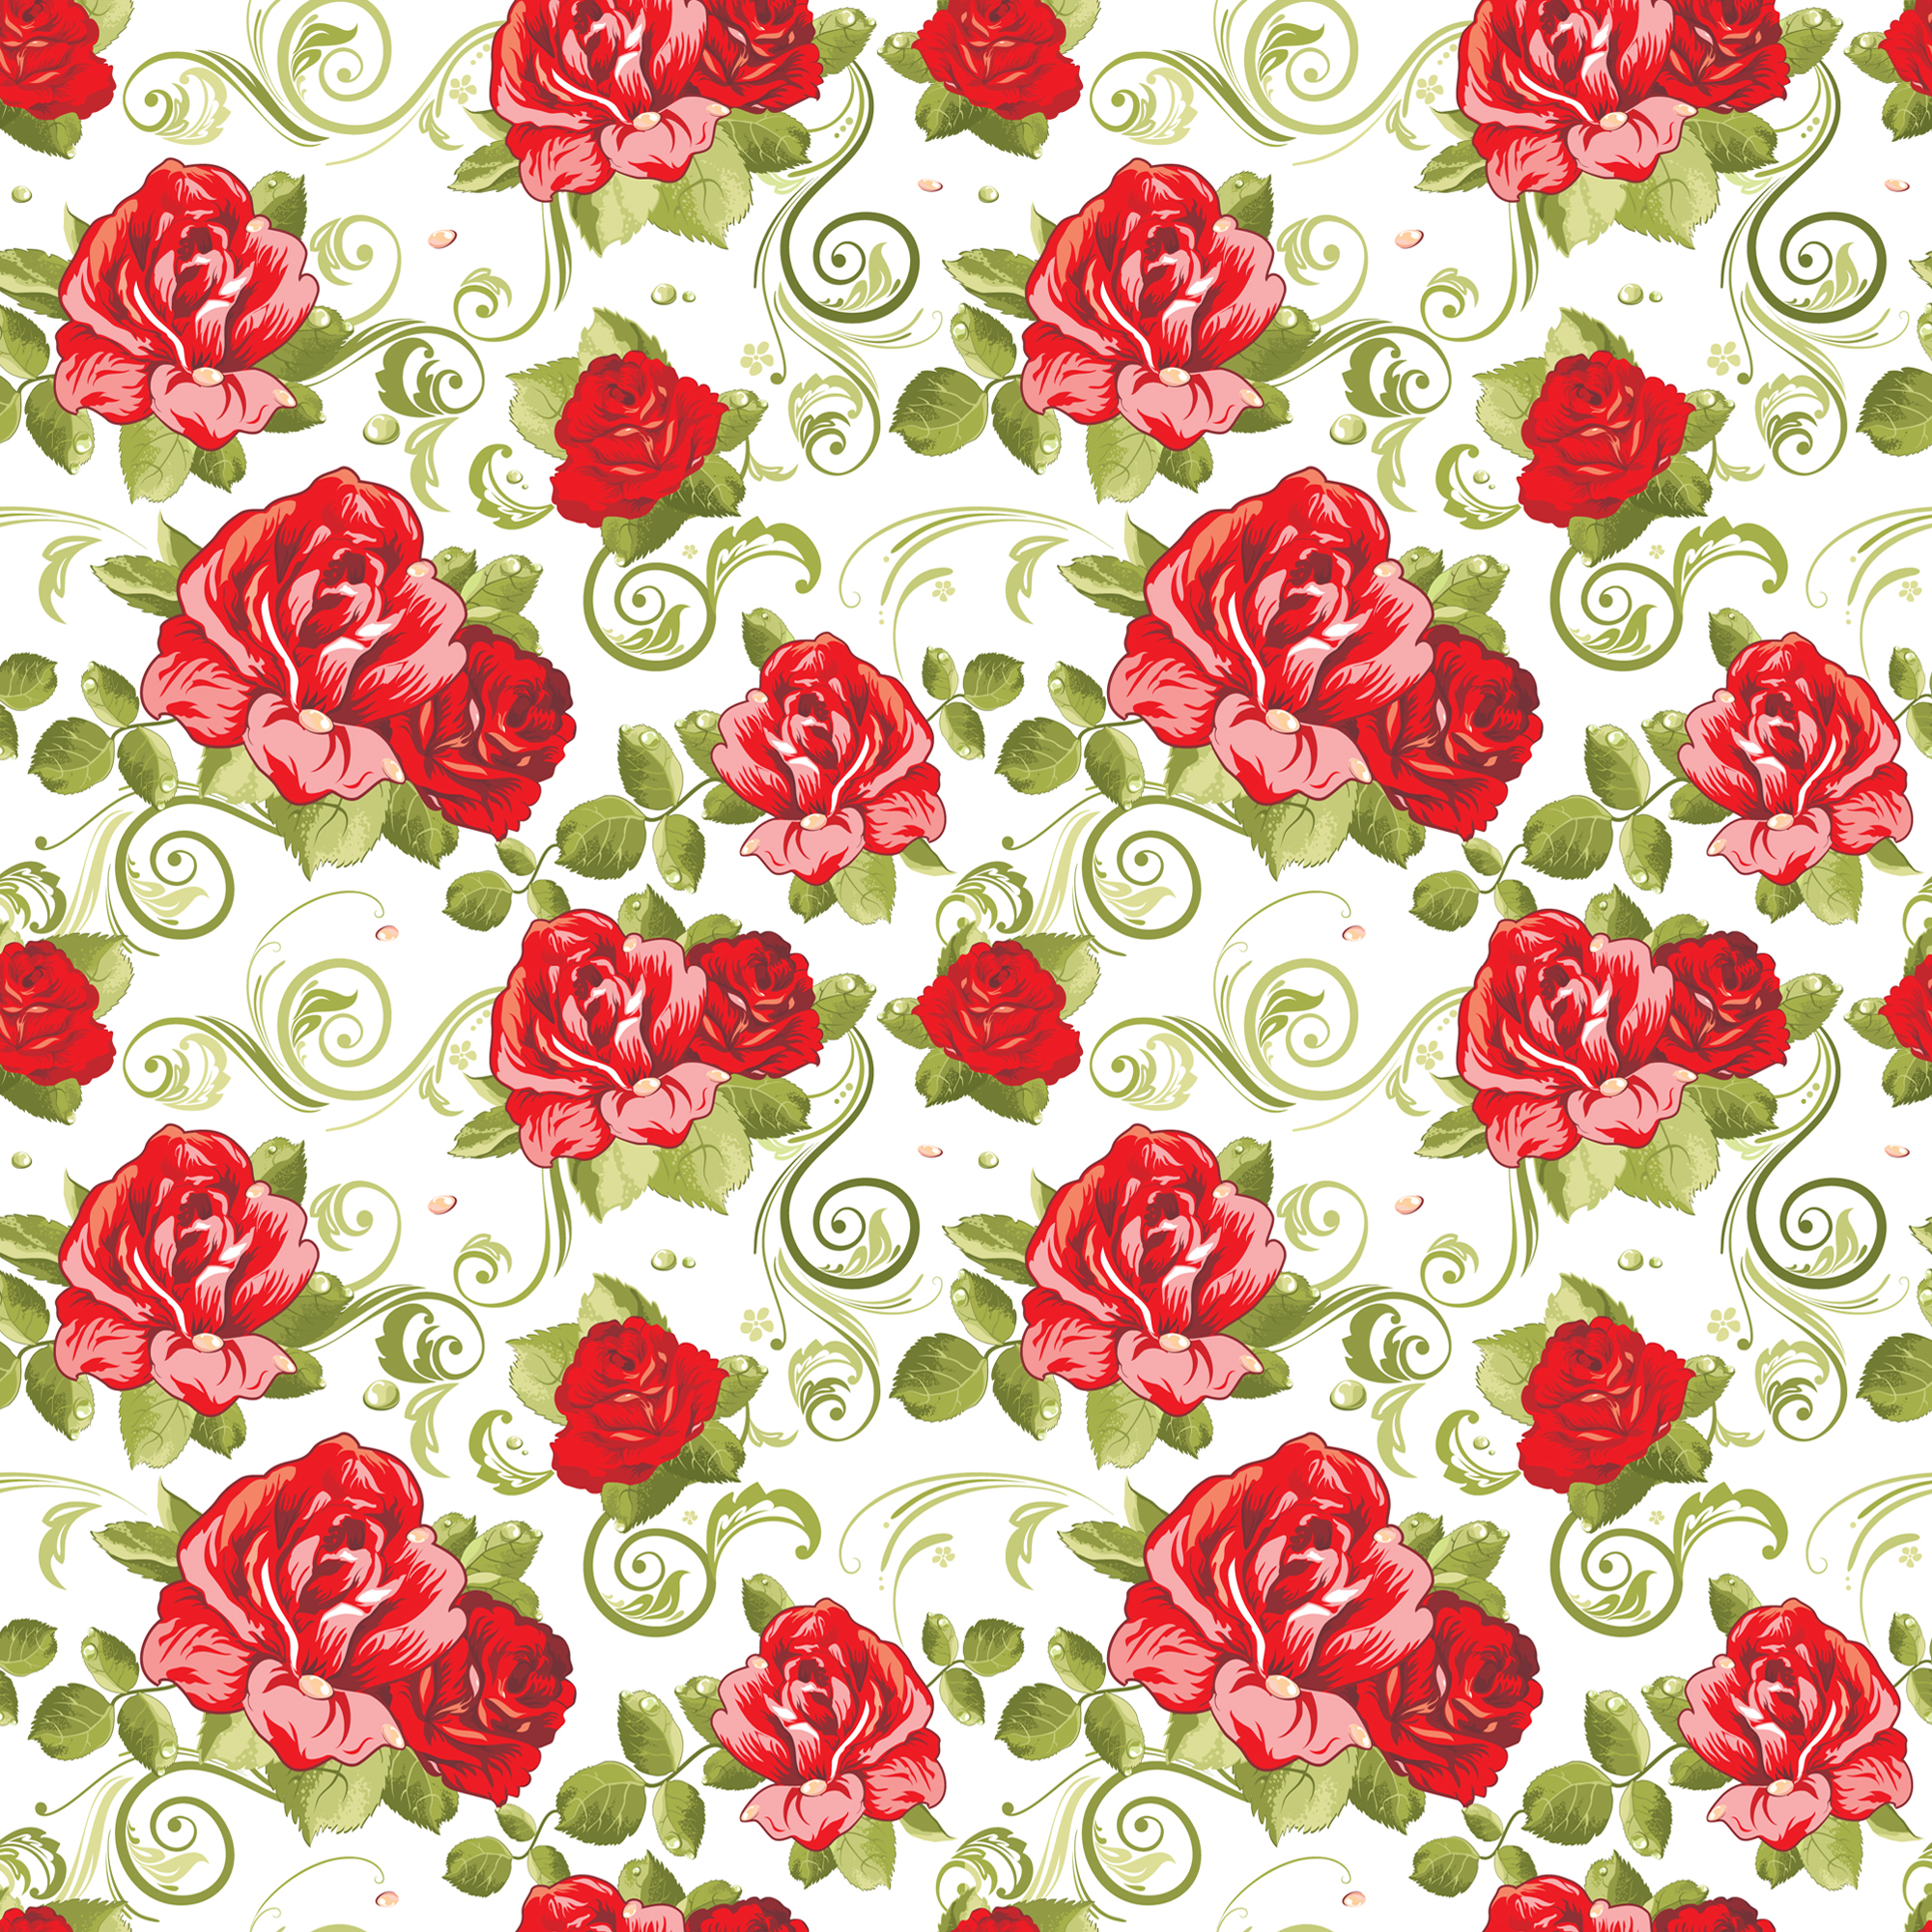 background, pictures, roses, flowers, patterns cellphone